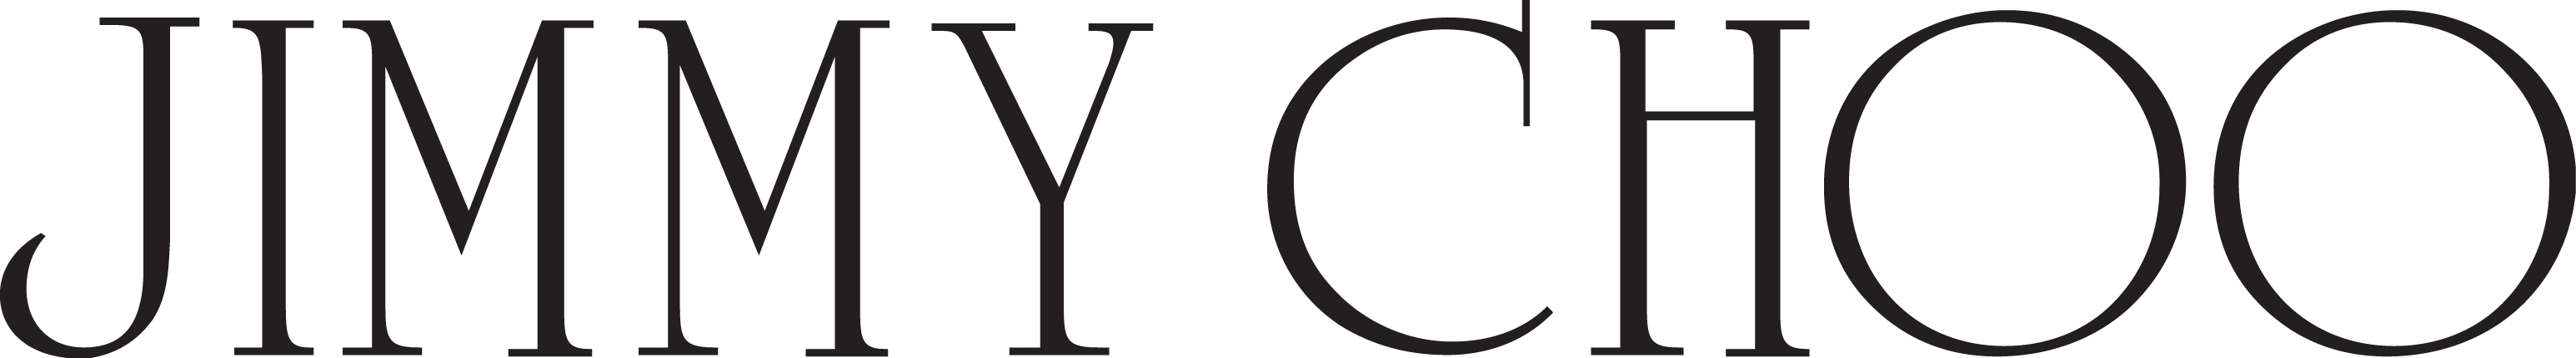 Jimmy Choo logo and symbol, meaning, history, PNG, brand